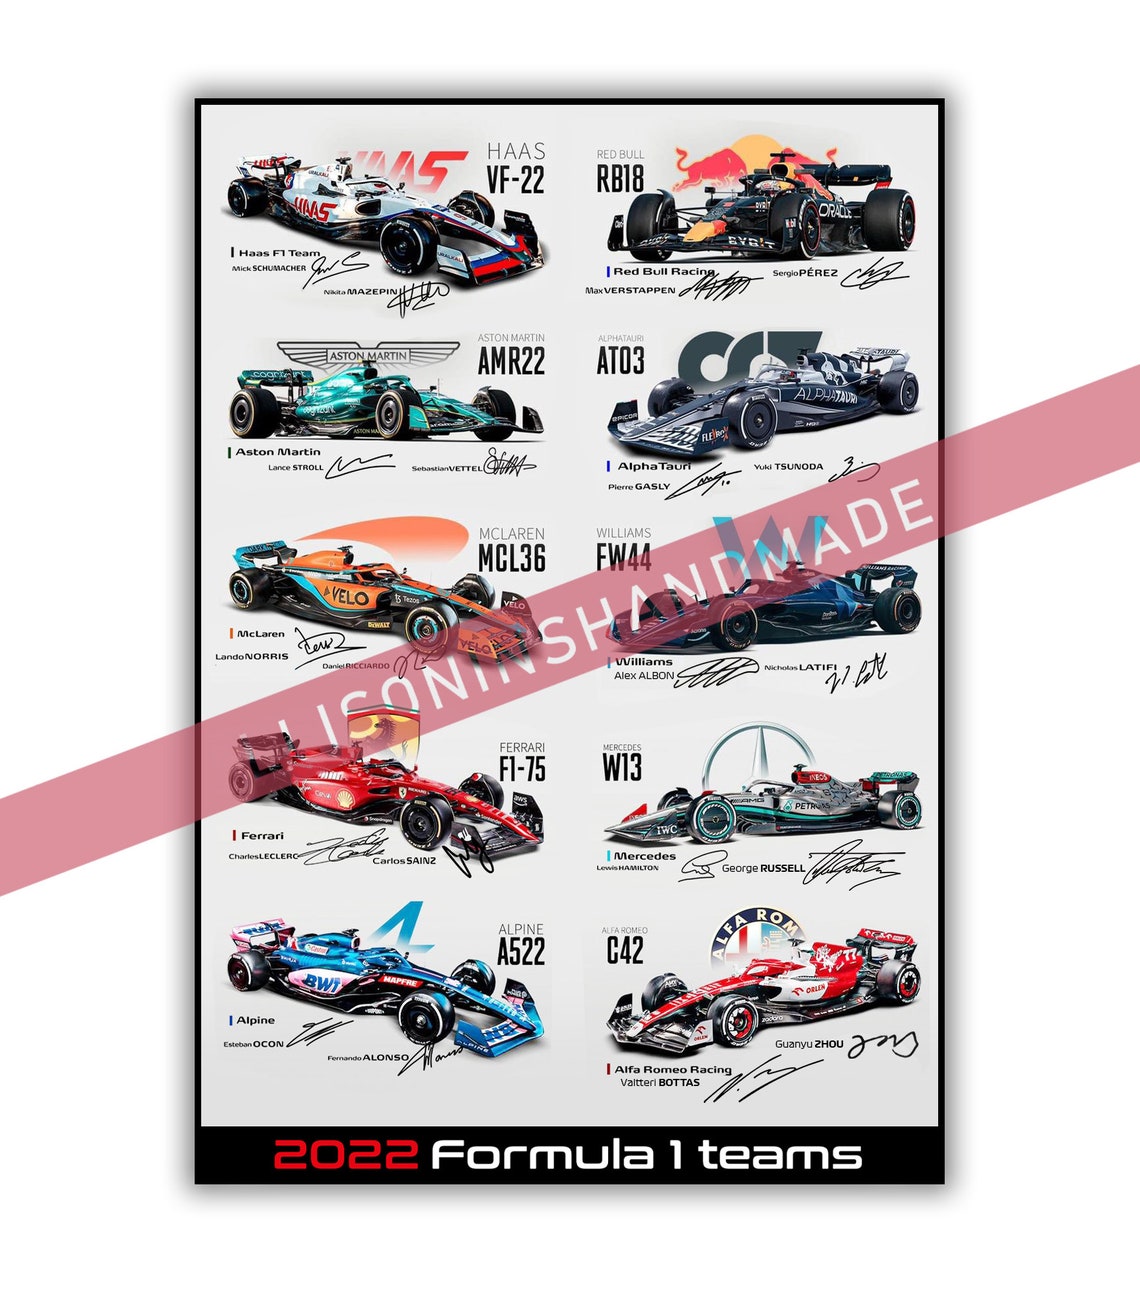 F1 FORMULA ONE 2019 ALL DRIVERS TEAMS 1 SIGNED POSTER PRINT PHOTO AUTOGRAPH GIFT 